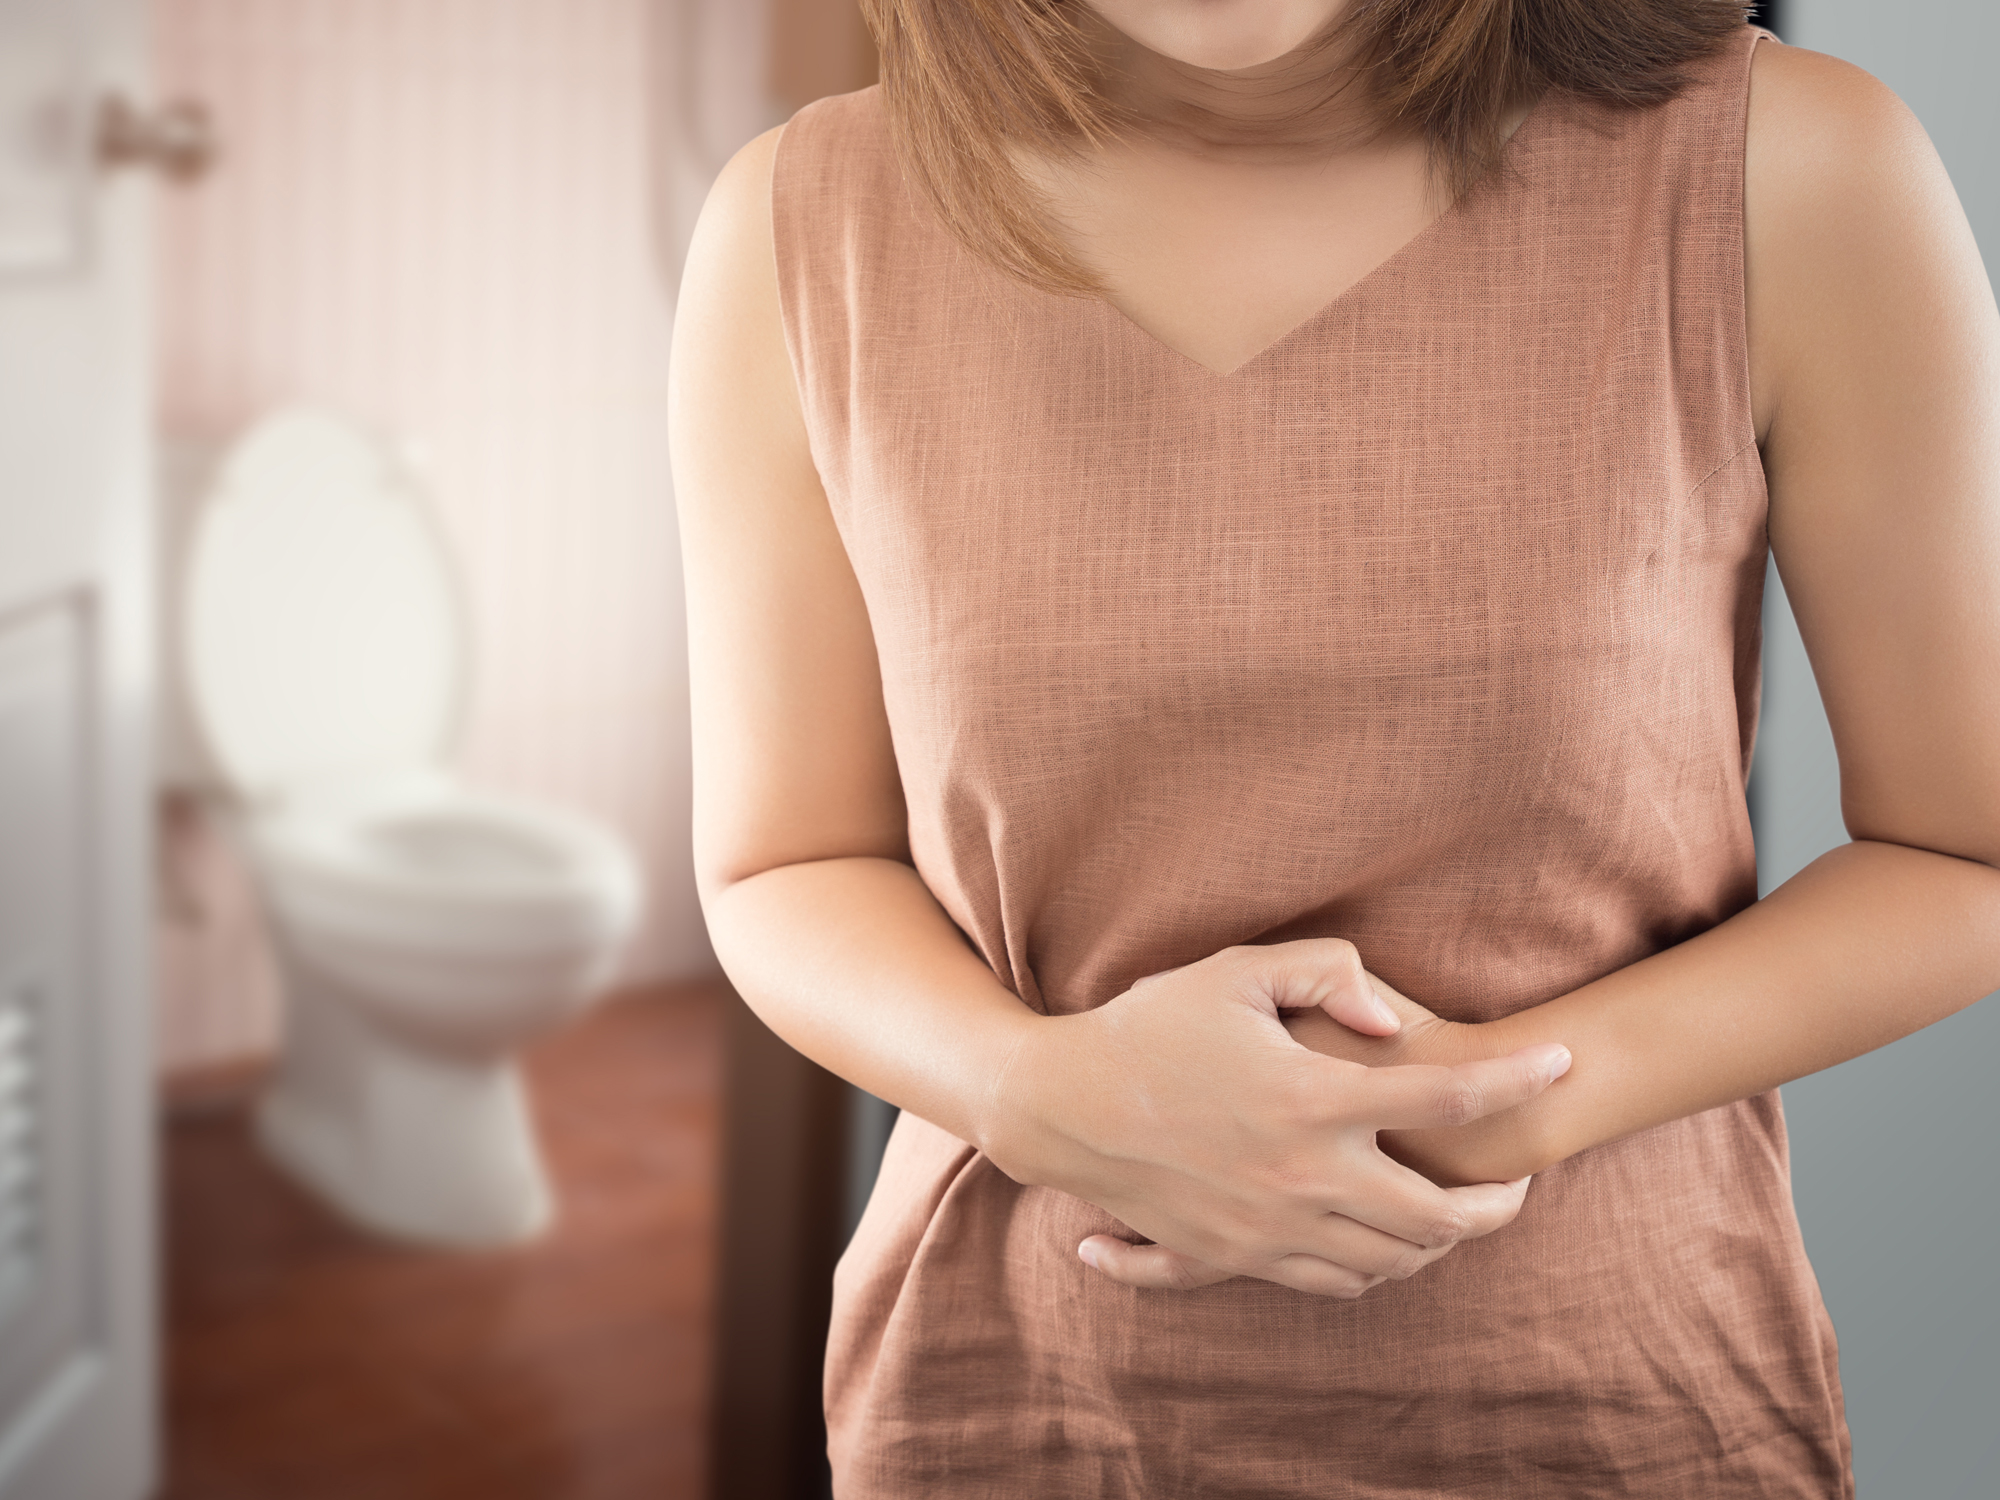 How bowel problems put your heart at high risk